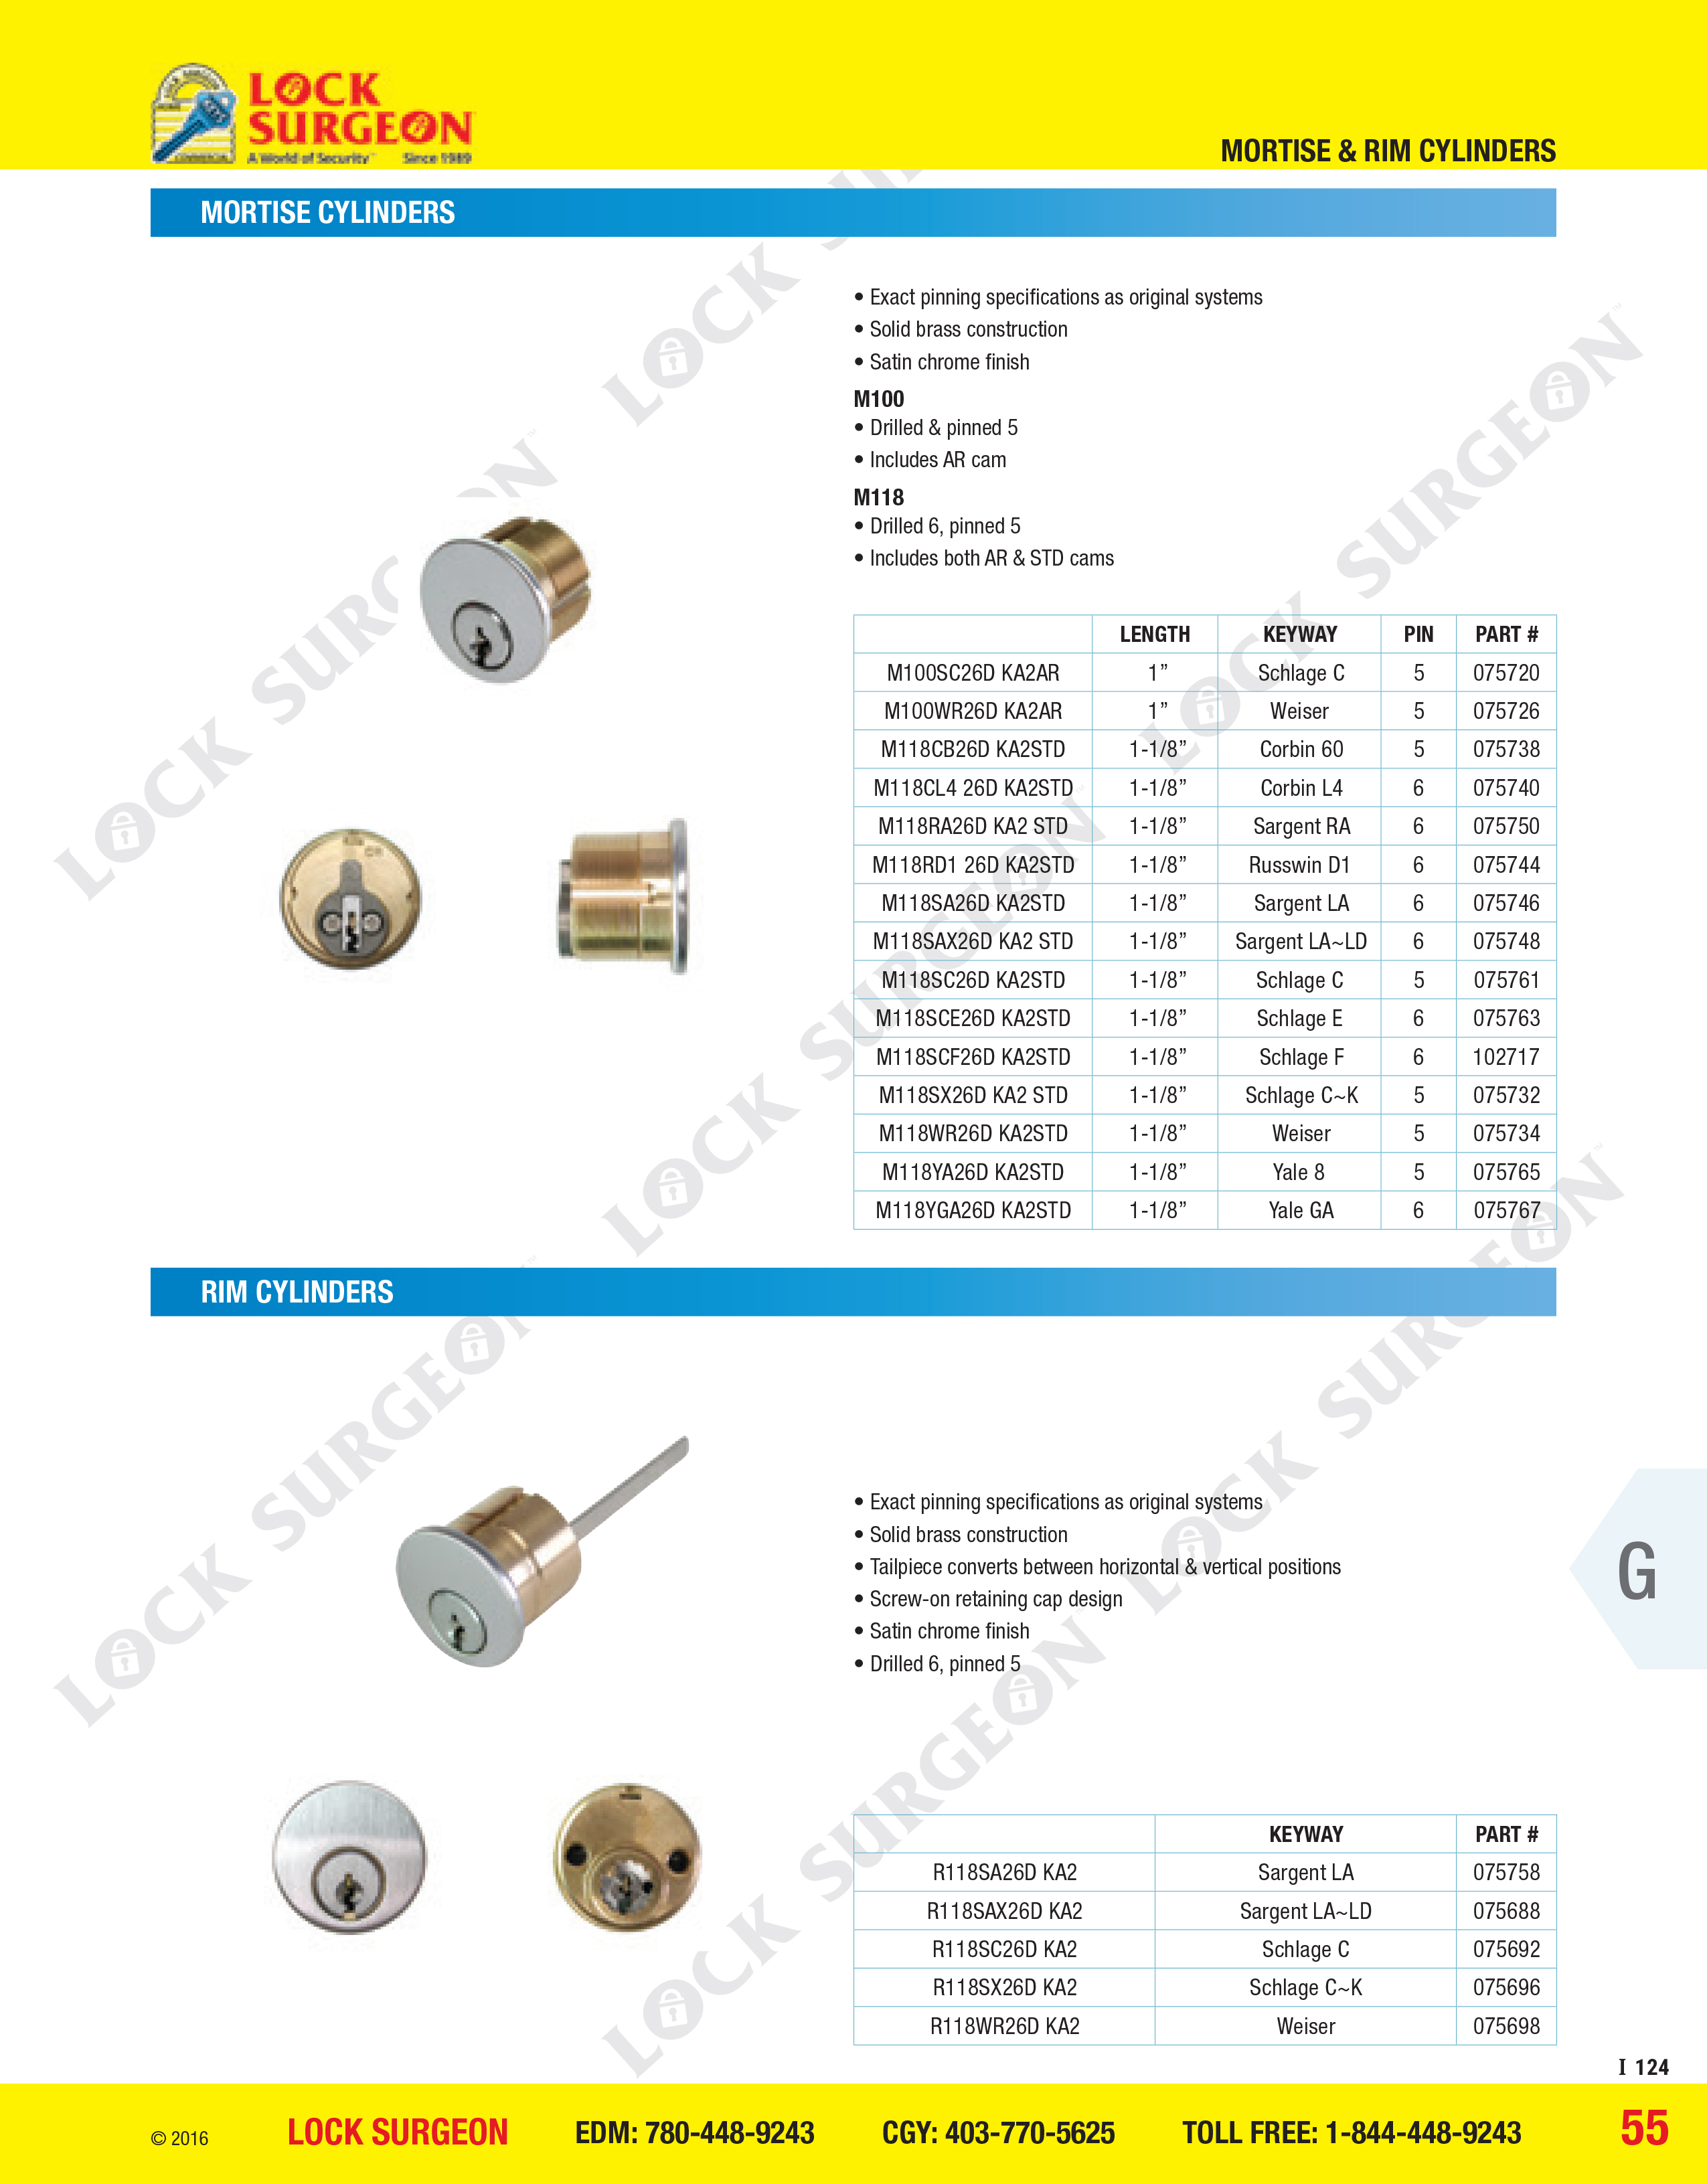 GMS mortise and rim cylinder exact pinning specifications as original systems.